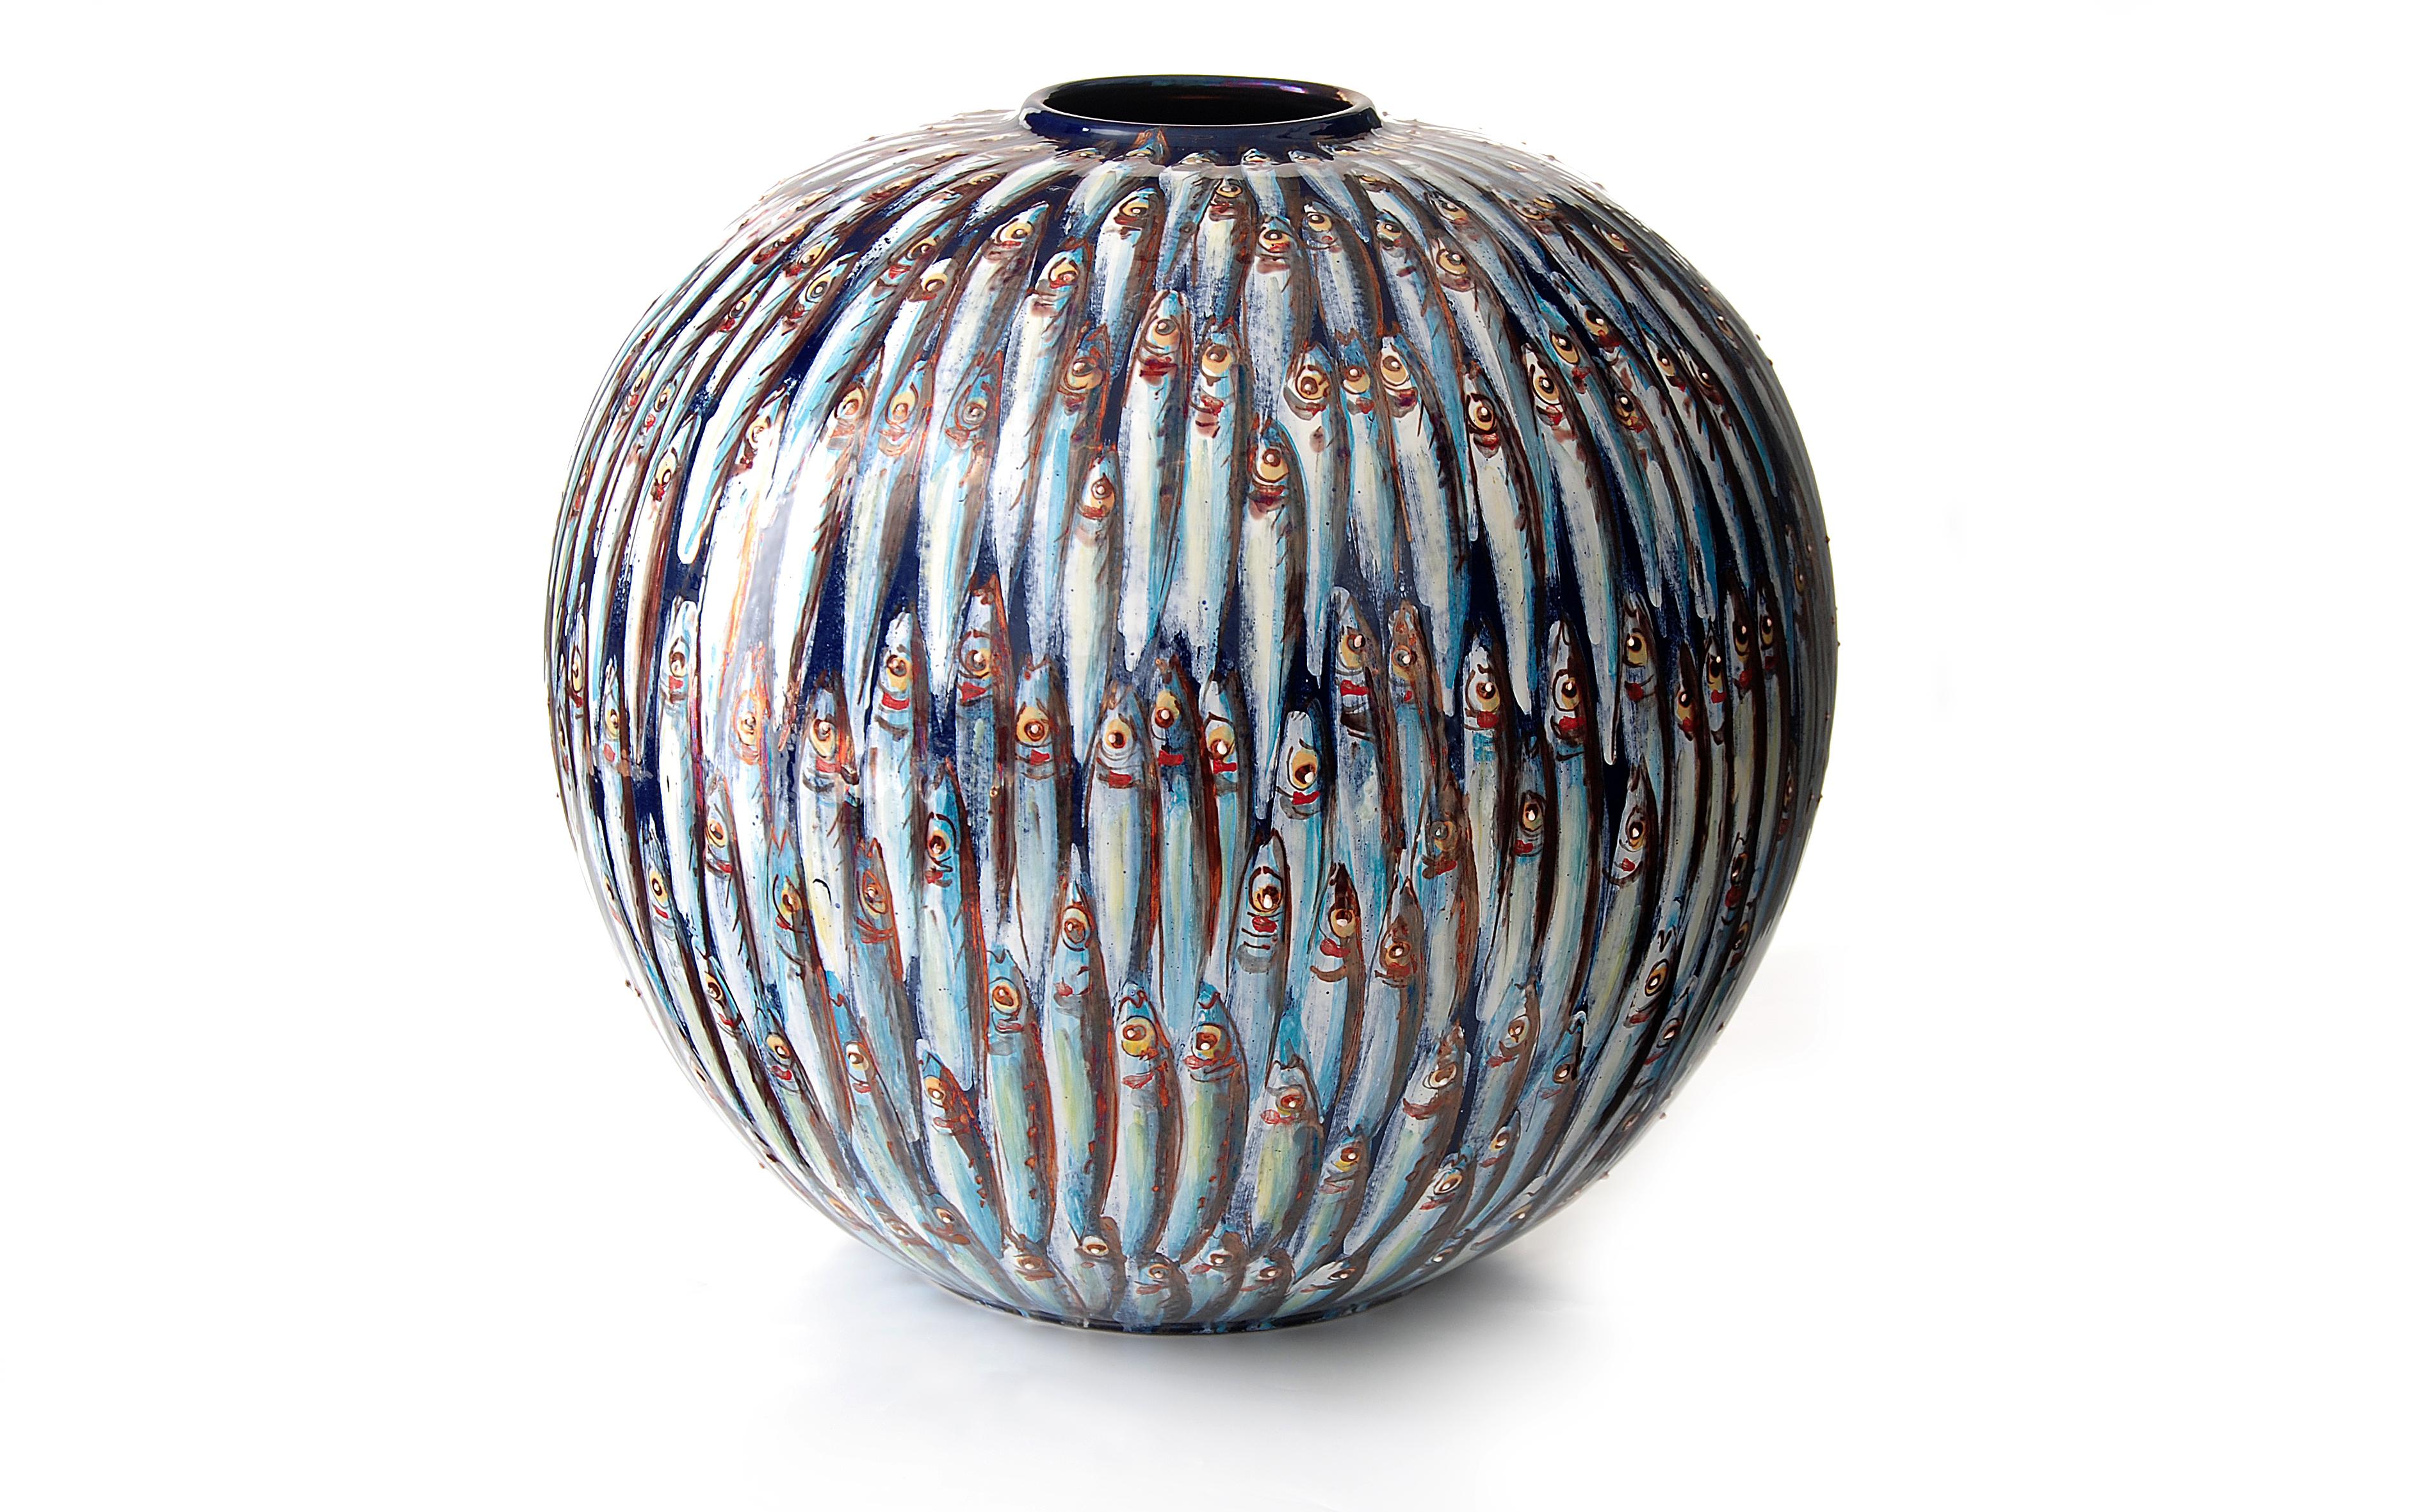 Mediterranea moon jar, 2021, full-fire reduction faience earthenware (majolica) 30 cm diameter, hand painted unique piece.
Available diameter sizes: 40cm,30cm and 25cm - (the price of this item refers to the 30cm one)
Available customisation: Blue